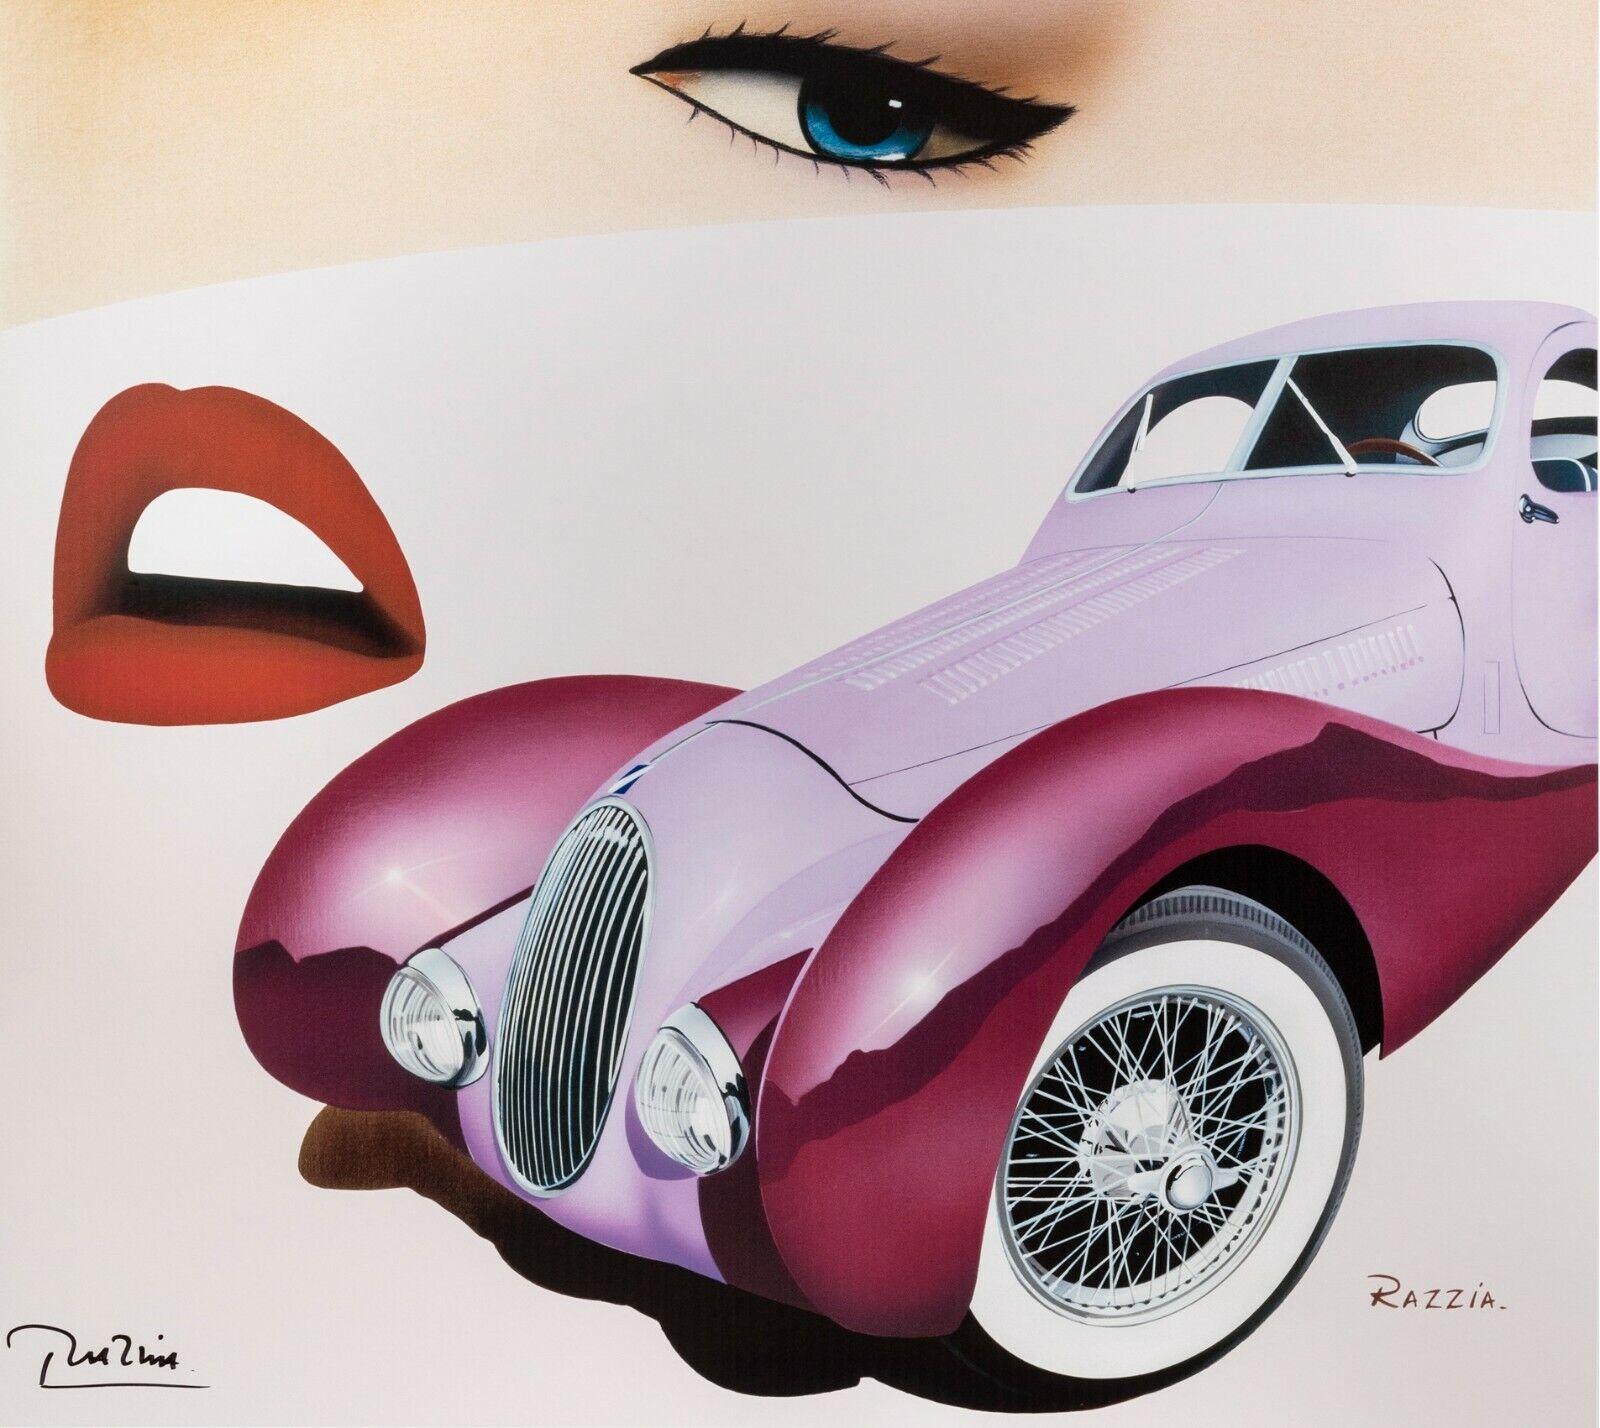 Original and Hand Signed Original Louis Vuitton classic car poster showing a Talbot Lago T150 C SS Teardrop Coupe dating from 1993 by Razzia (Gerard Courbouleix Deneriaz; b.1950).

This is a hand signed open edition poster and not a